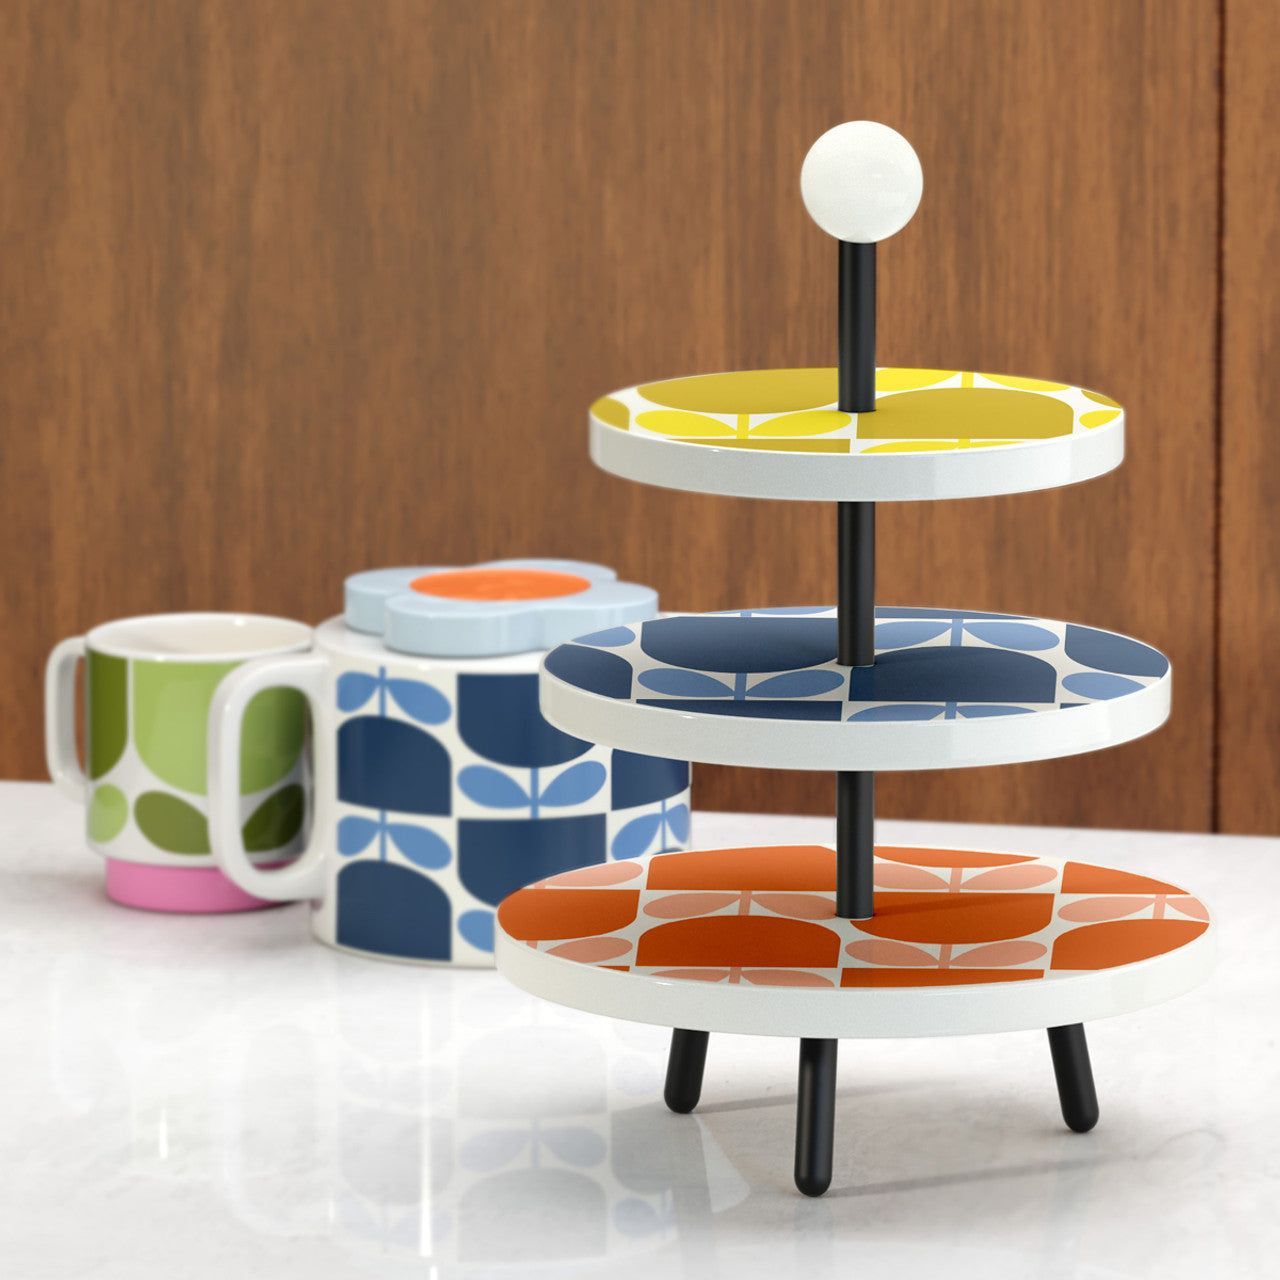 Fab Gifts | Orla Kiely Block Flower Cupcake Stand by Weirs of Baggot Street